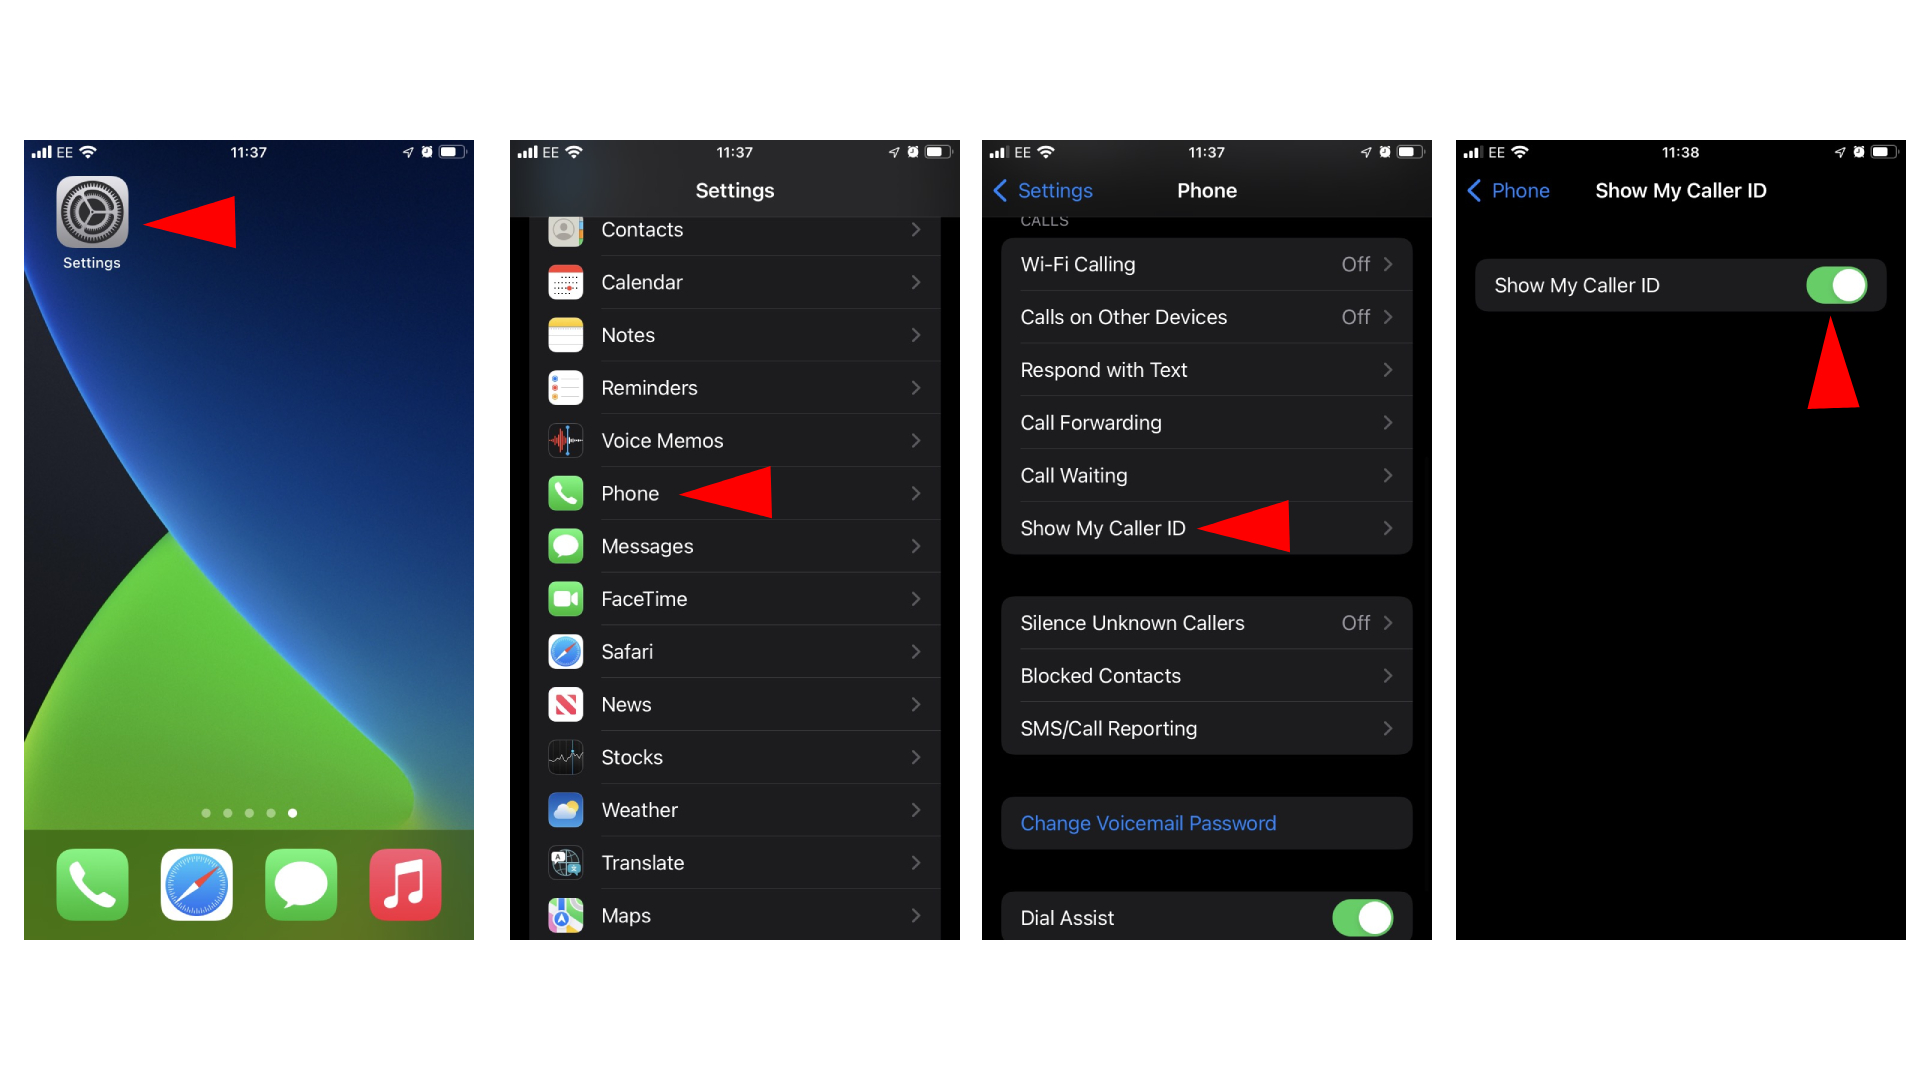 How to hide caller ID on iPhone